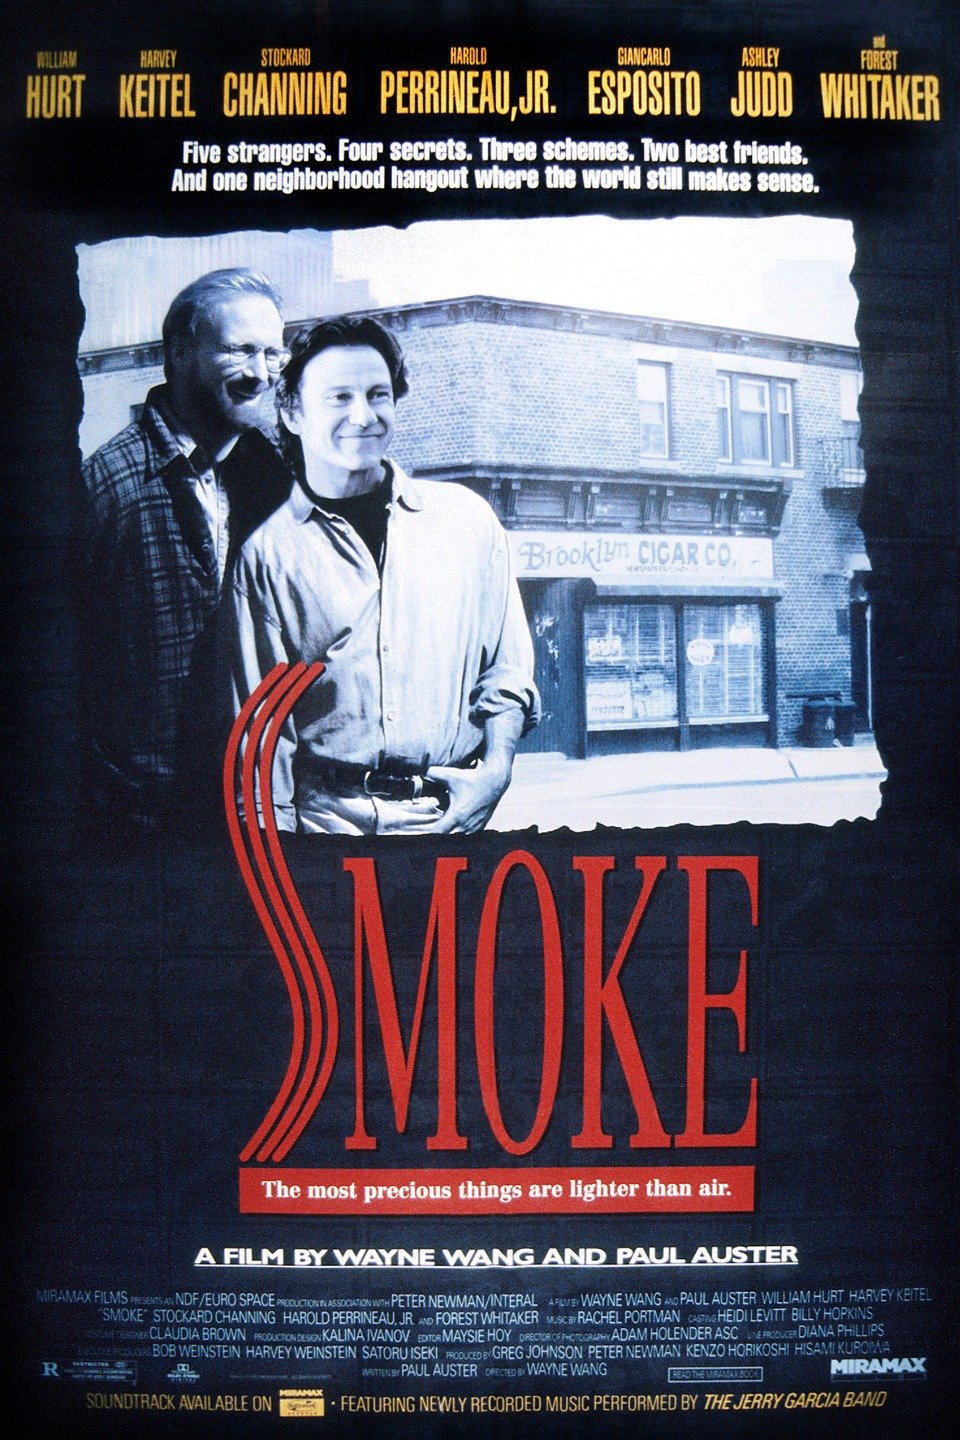 Movie poster for "Smoke"